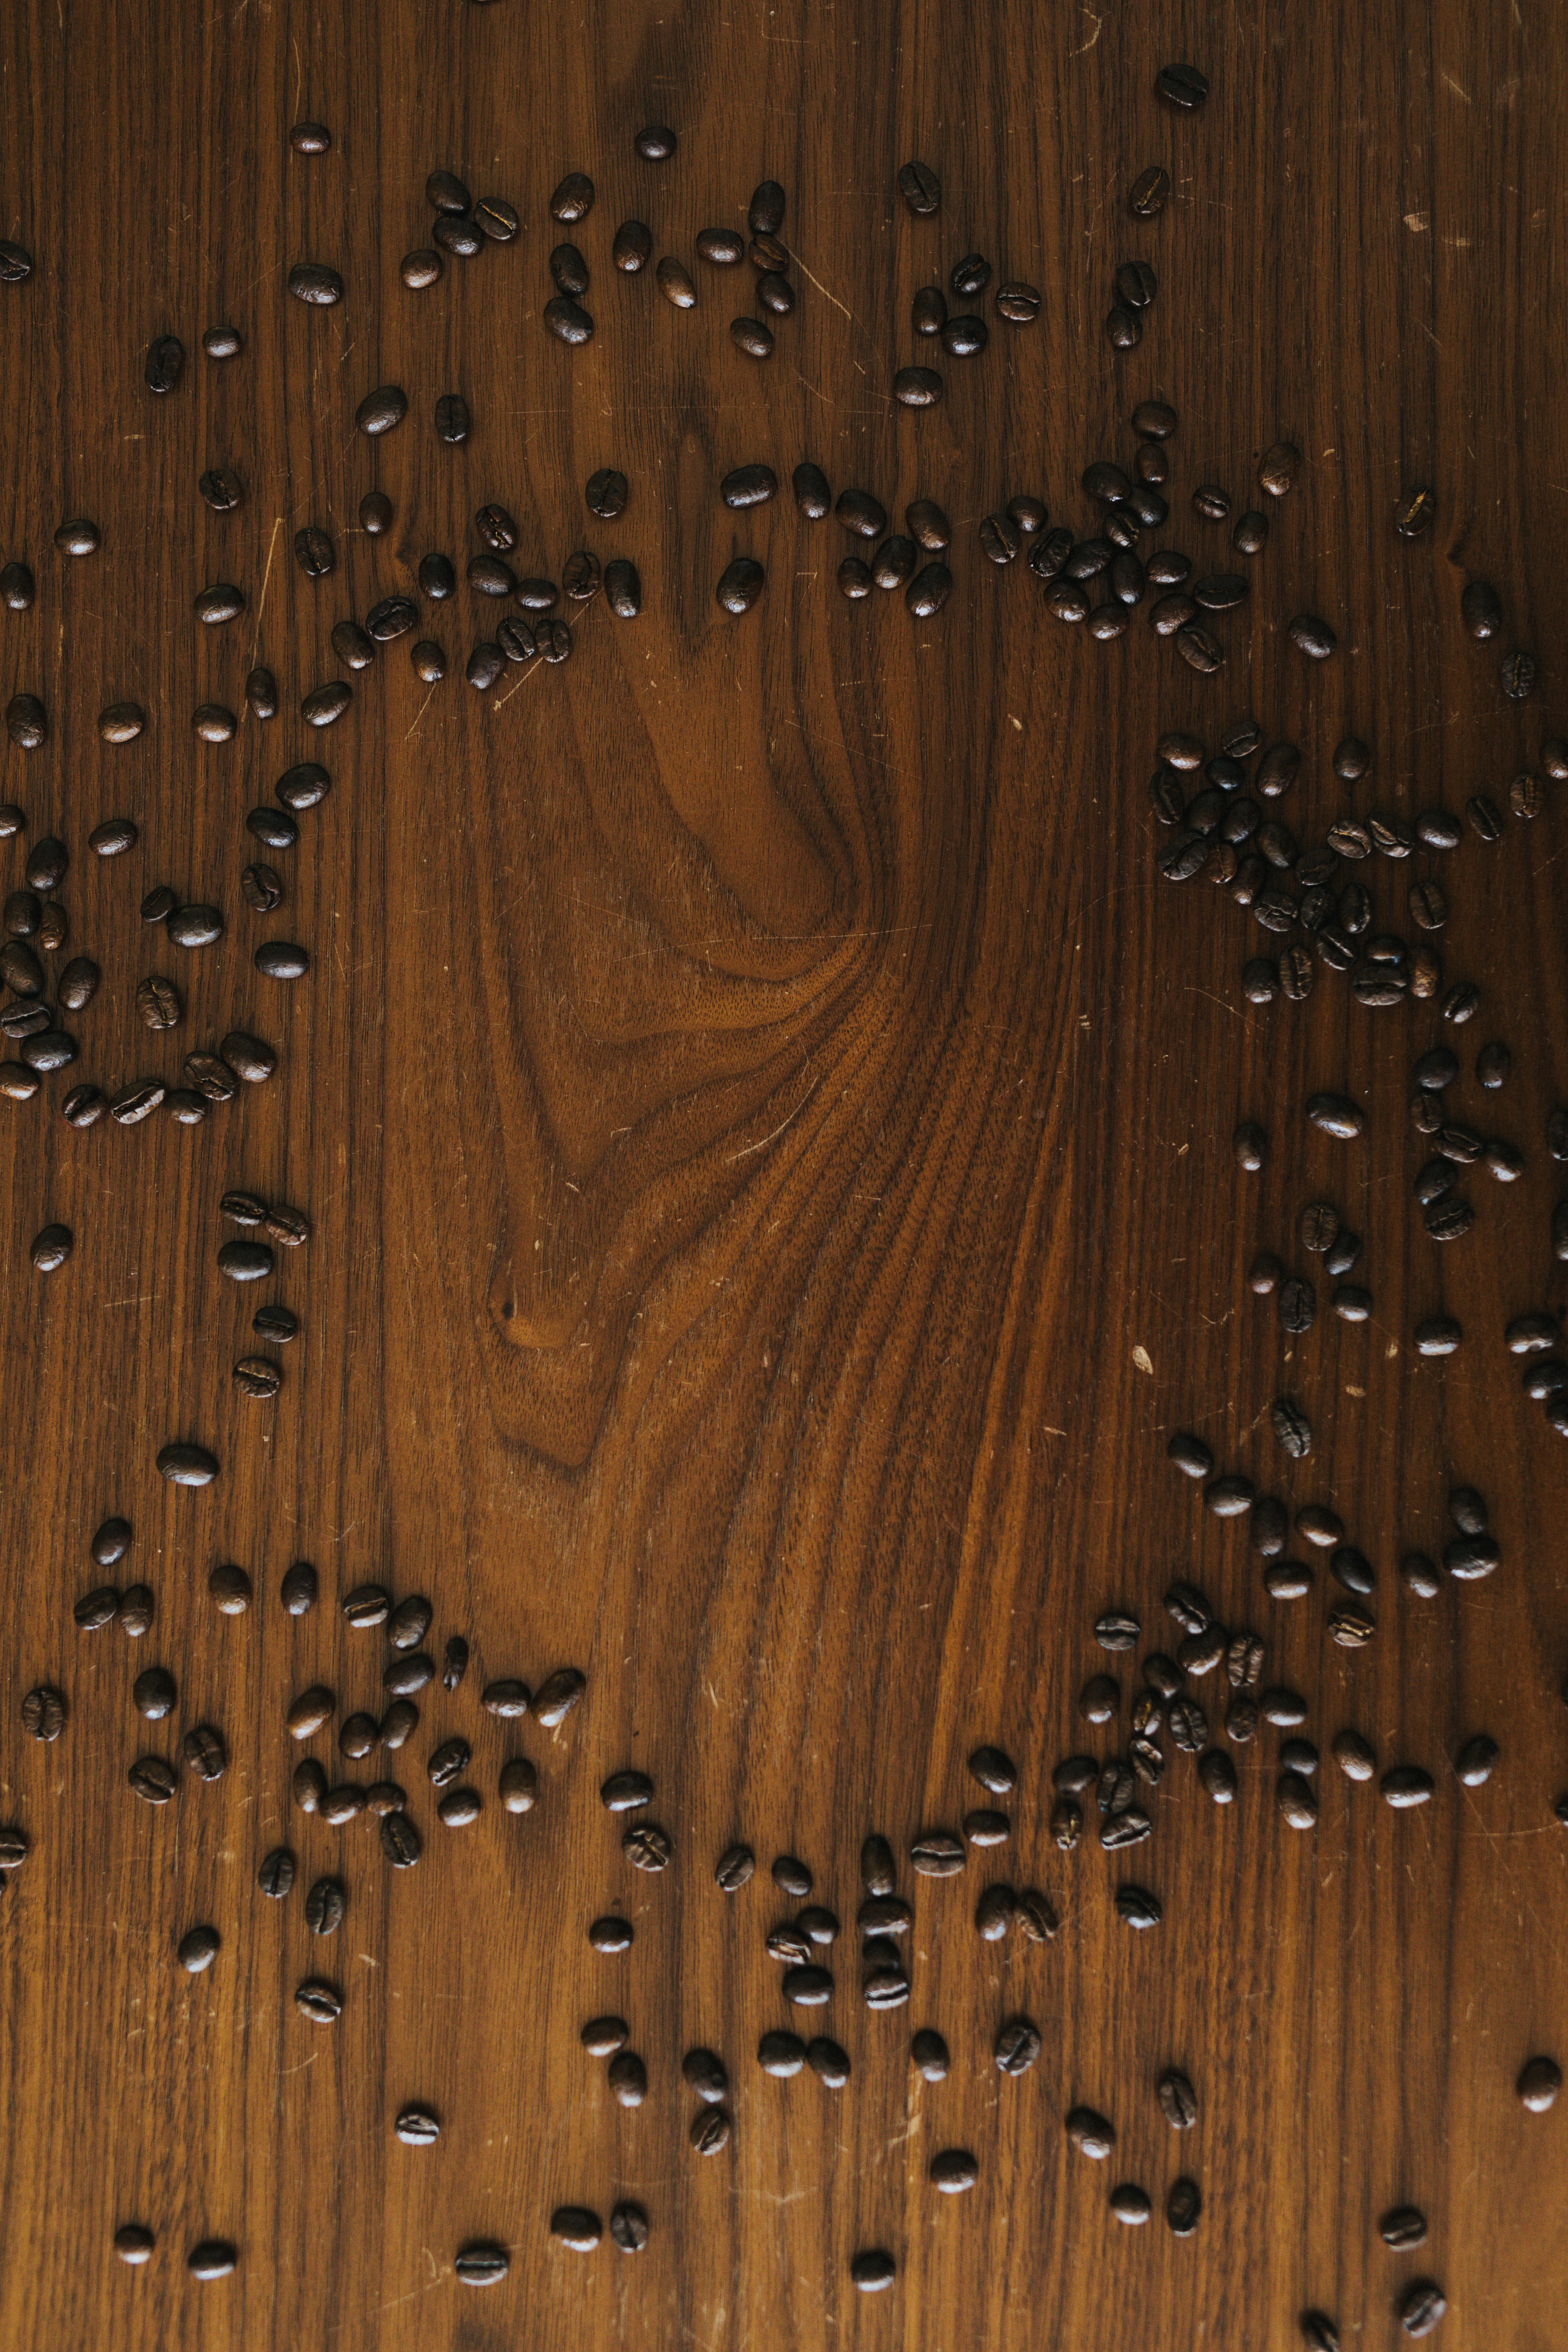 android food, coffee, wood, wooden, surface, grains, coffee beans, grain